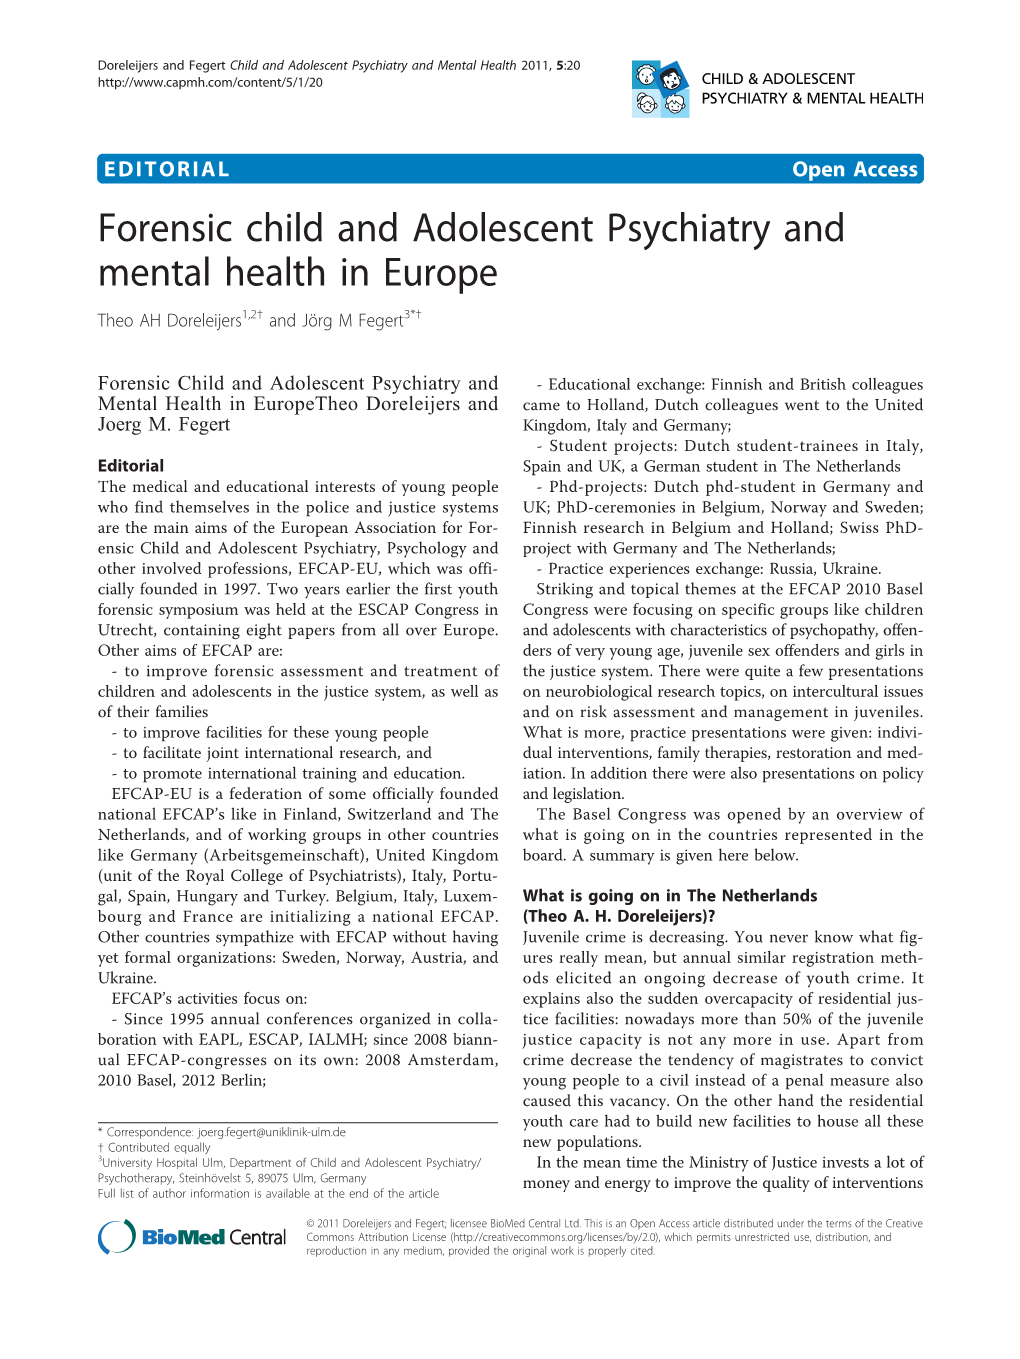 Forensic Child and Adolescent Psychiatry and Mental Health in Europe Theo AH Doreleijers1,2† and Jörg M Fegert3*†